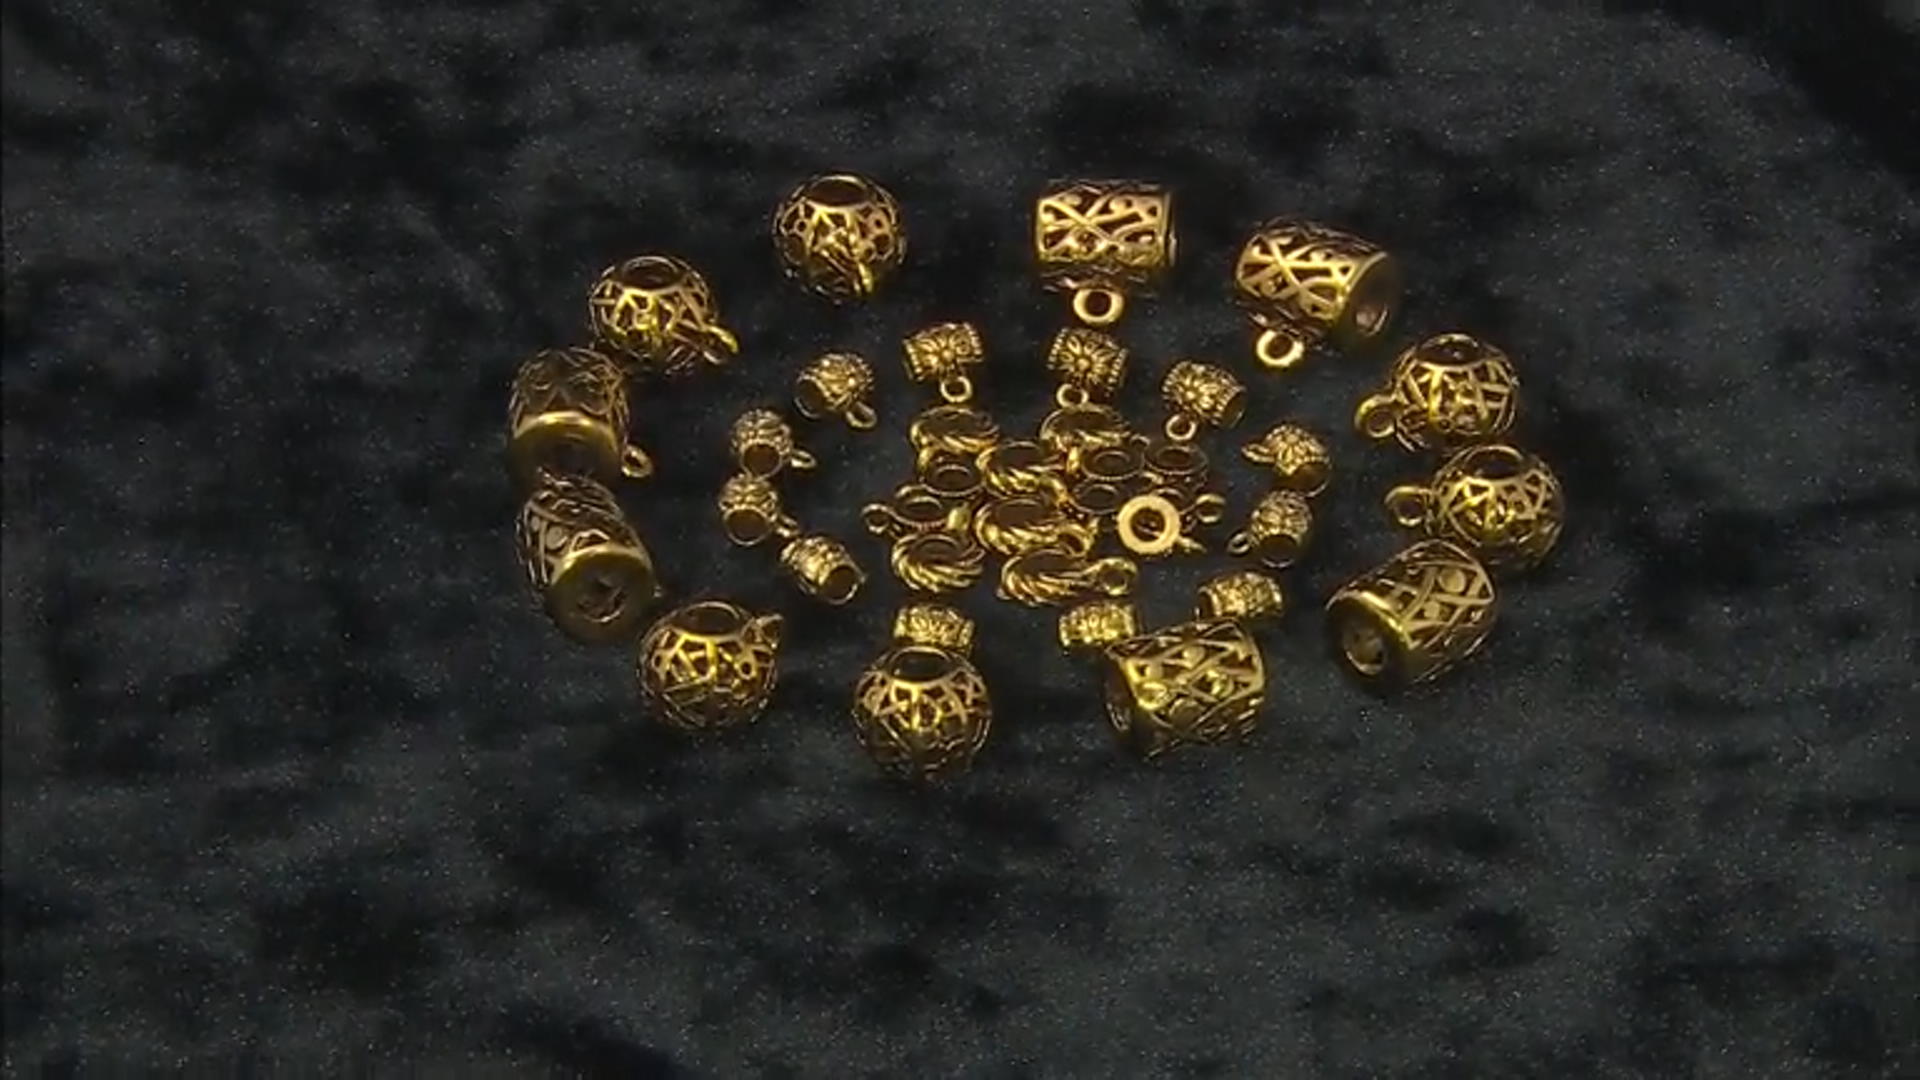 Bail Component Set Large Hole in 5 Styles in Antiqued Gold Tone appx 72 pieces total Video Thumbnail